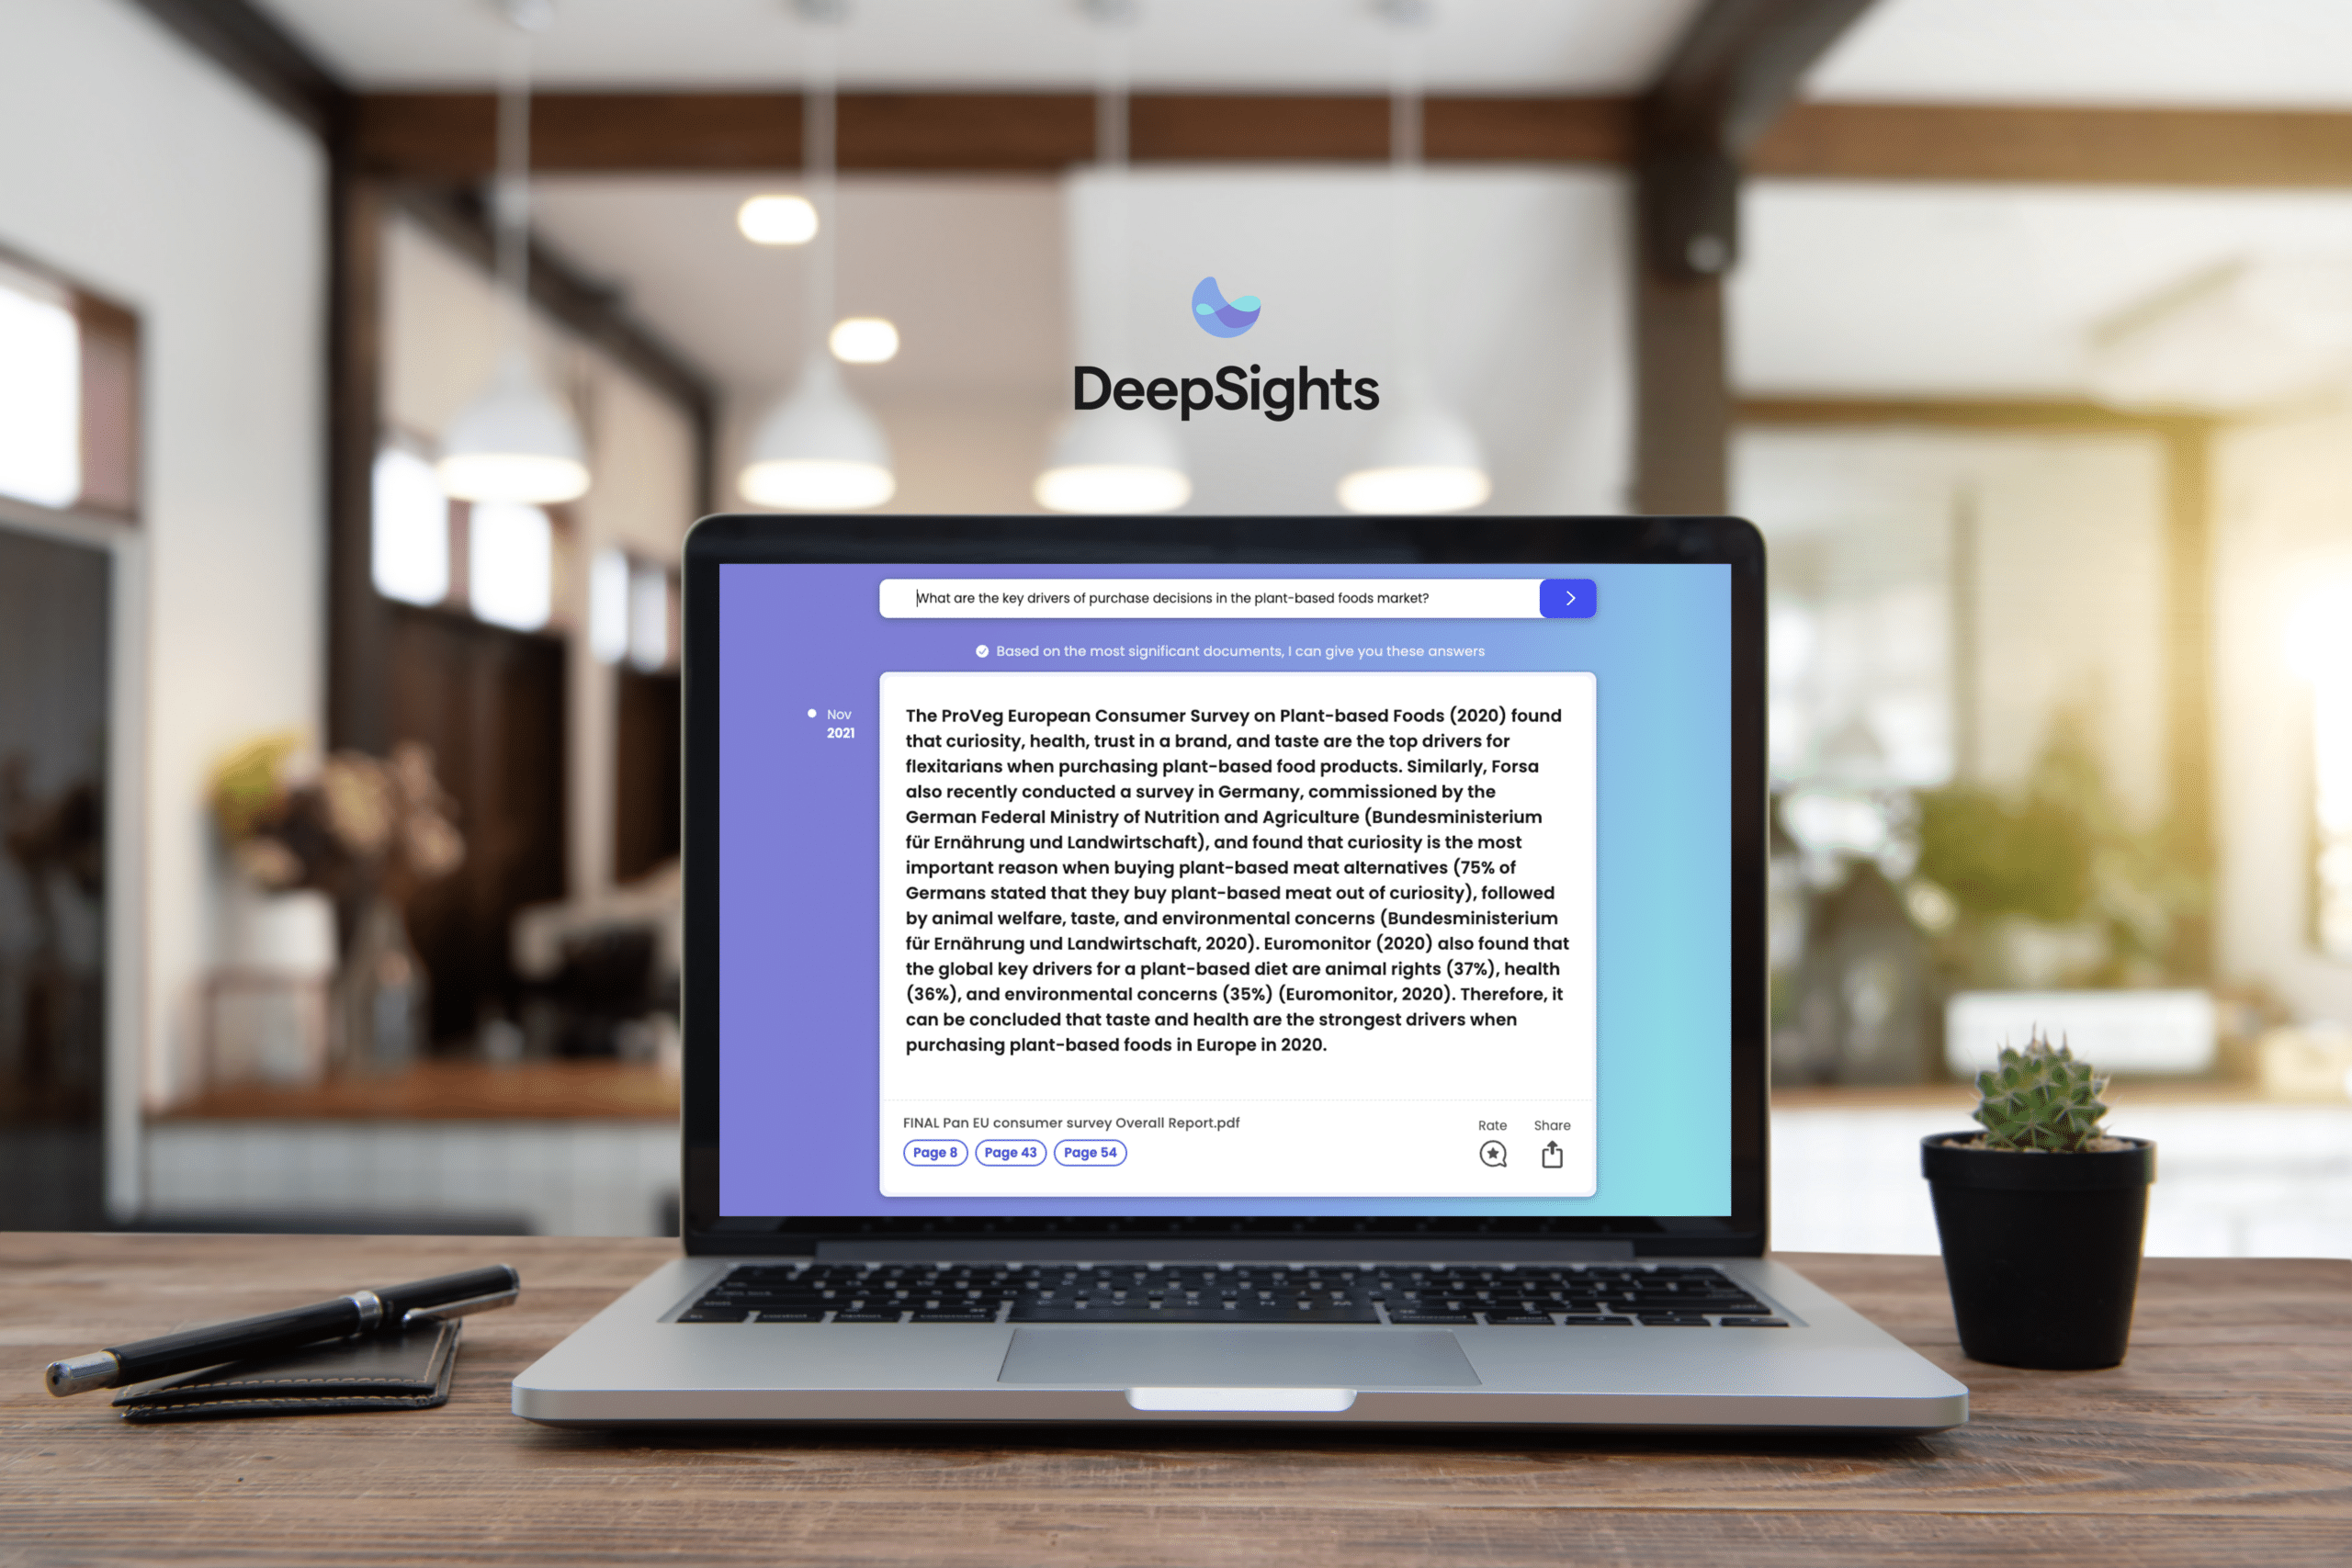 New generative AI solution from Market Logic Software, DeepSights™, places trusted market insights at the fingertips of business decision-makers 24/7